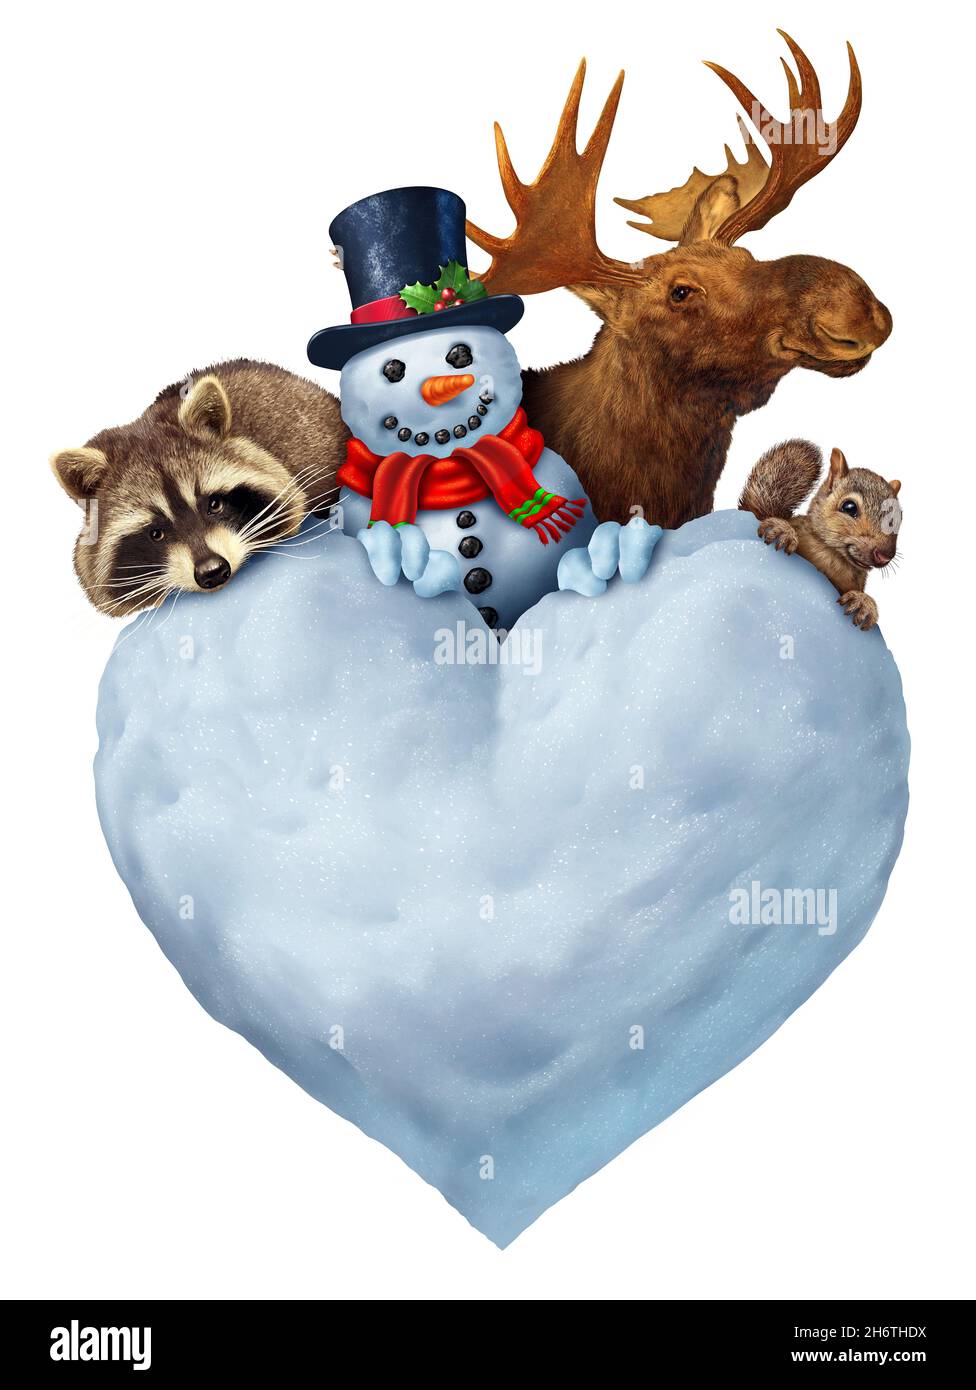 Funny winter wildlife as a Snowman a moose with a raccoon and squirrel behind a heart shaped snow sculpture as a fun animal Christmas holiday. Stock Photo